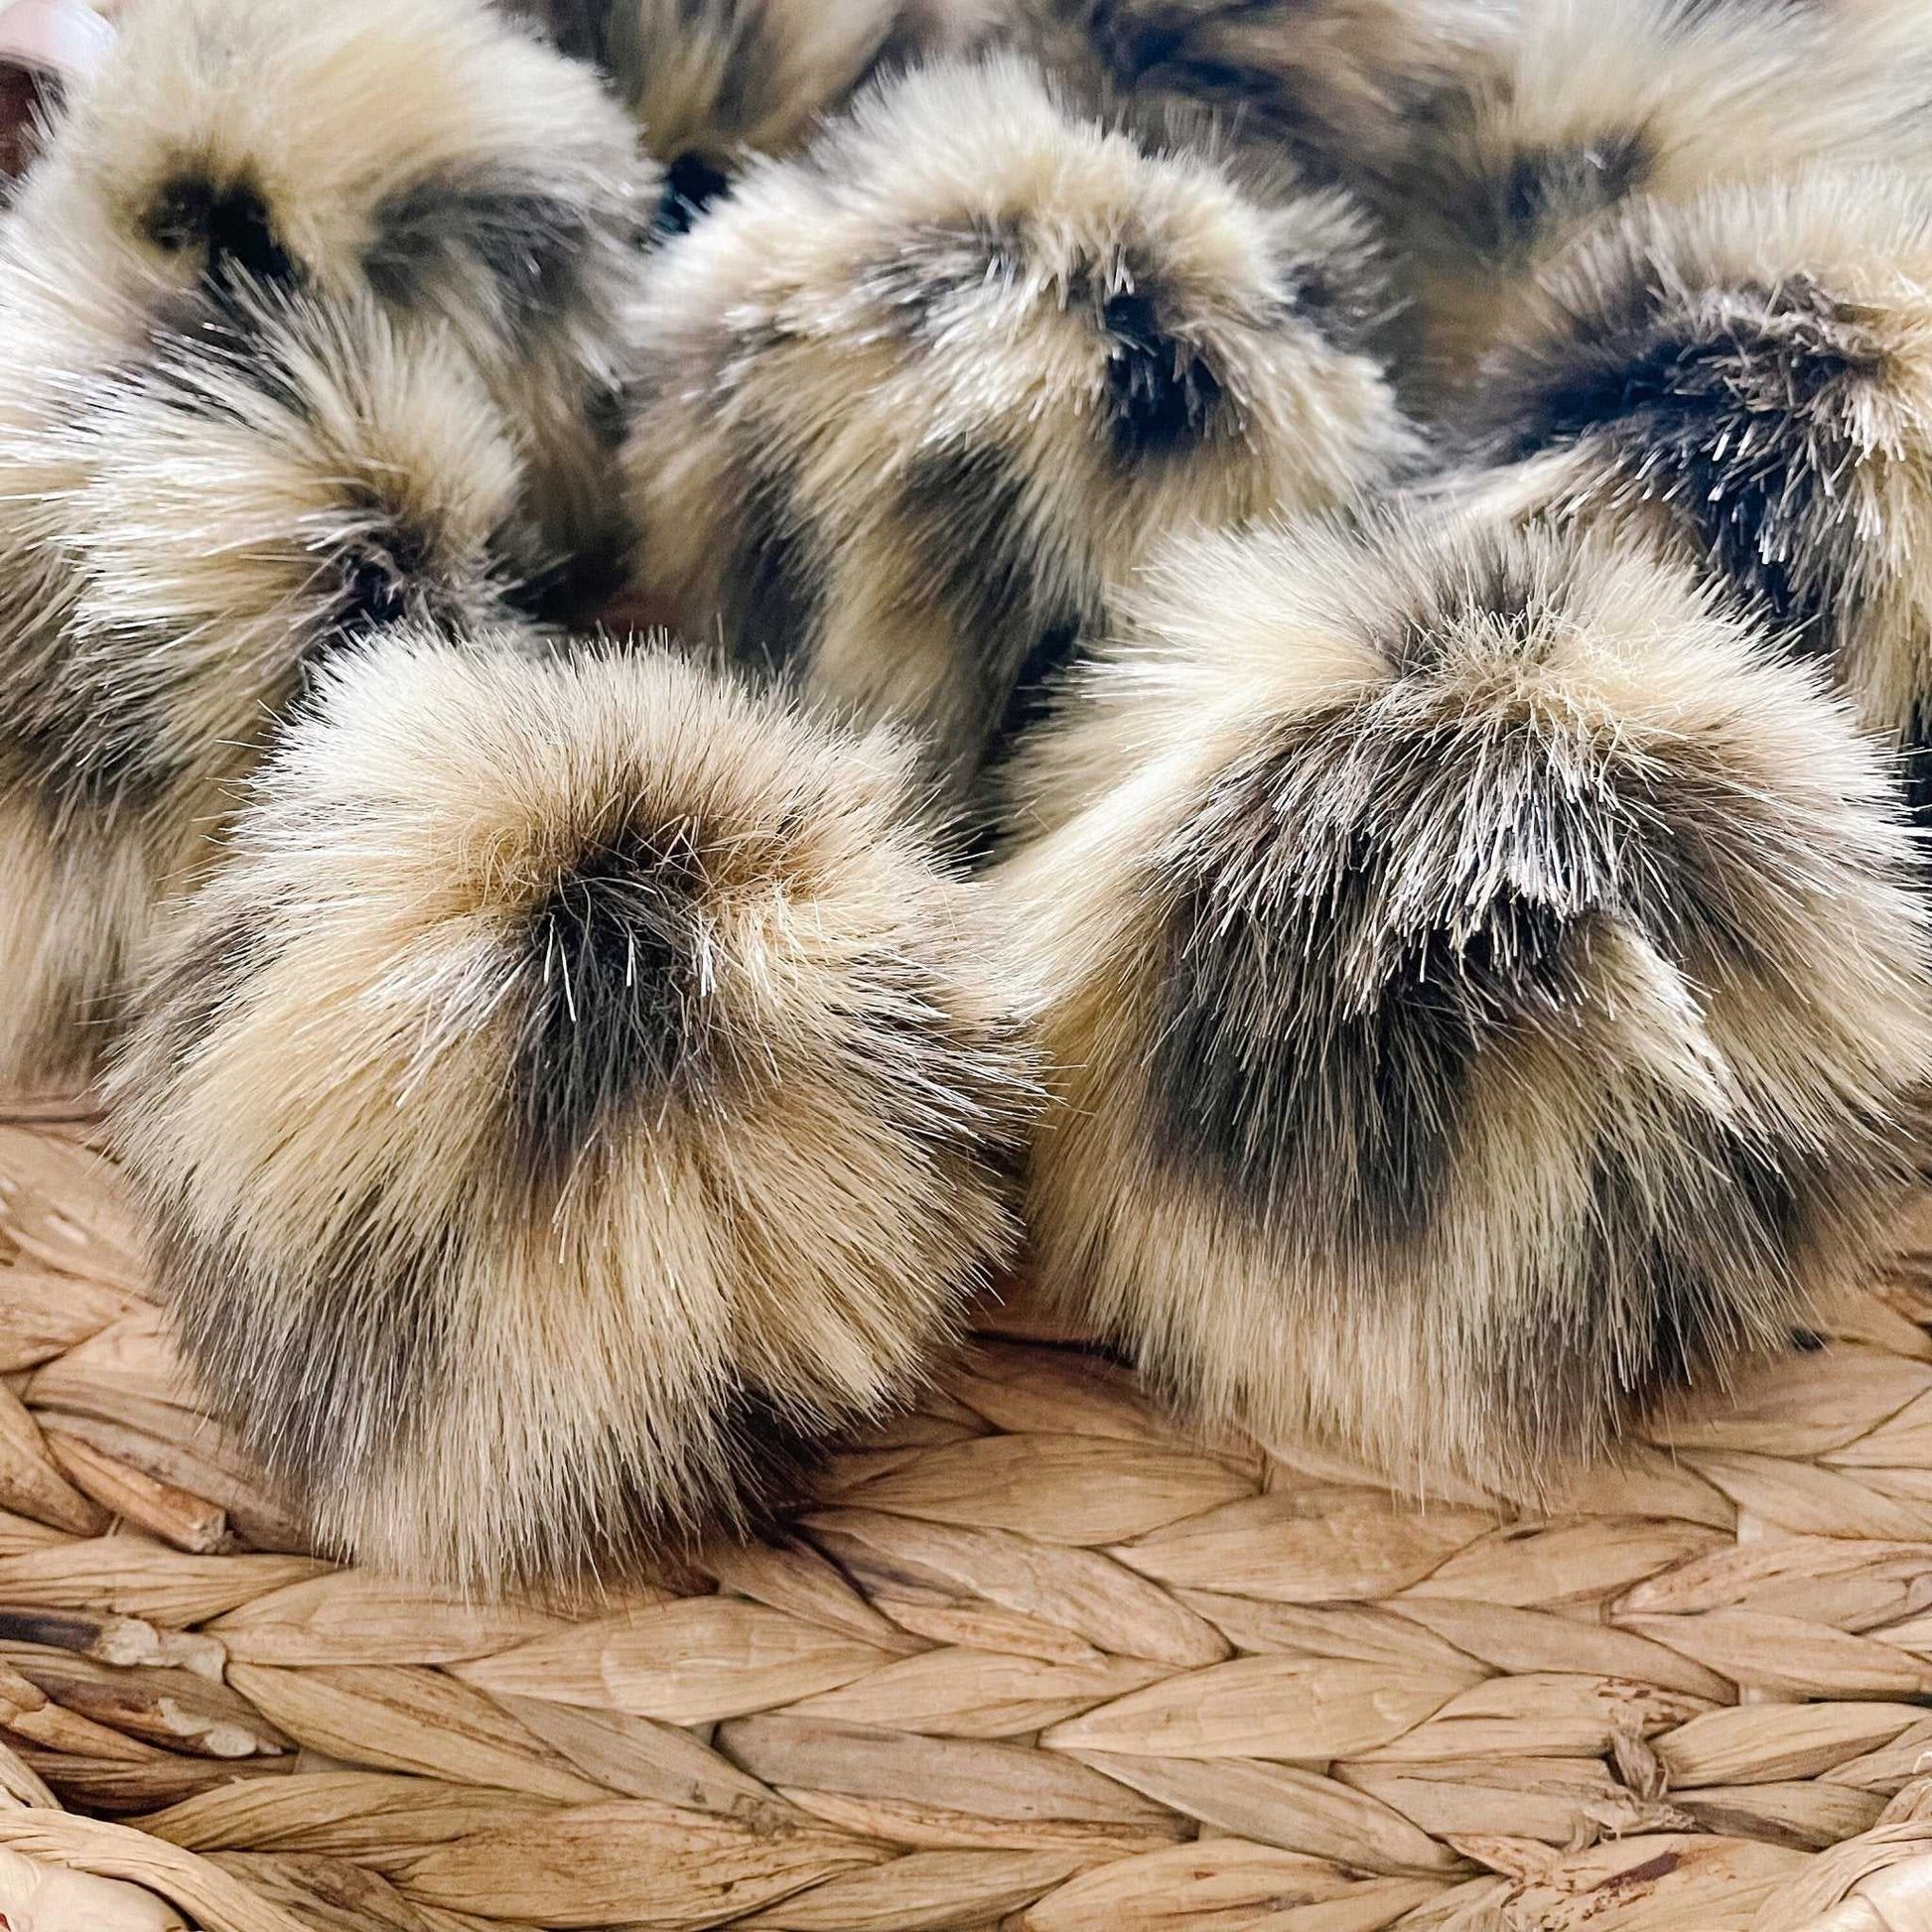 Leopard Faux Fur Fabric by the Yard or Meter | Black and Gold | Pompom Fur Faux Fur Fabric 4 $ Buttons & Beans Co.